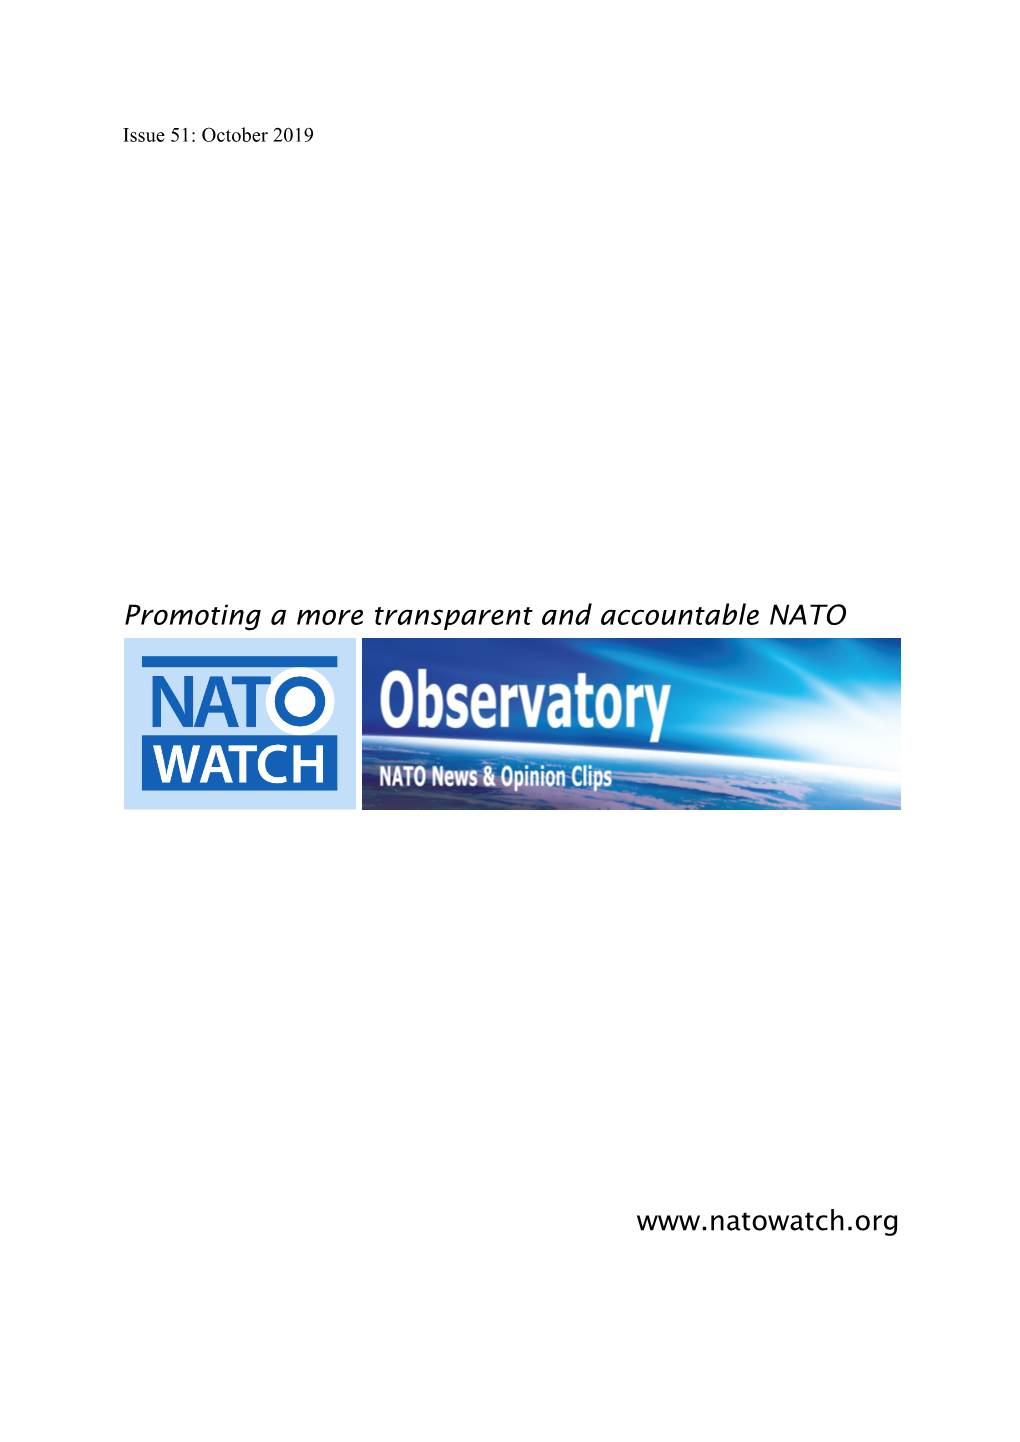 Promoting a More Transparent and Accountable NATO